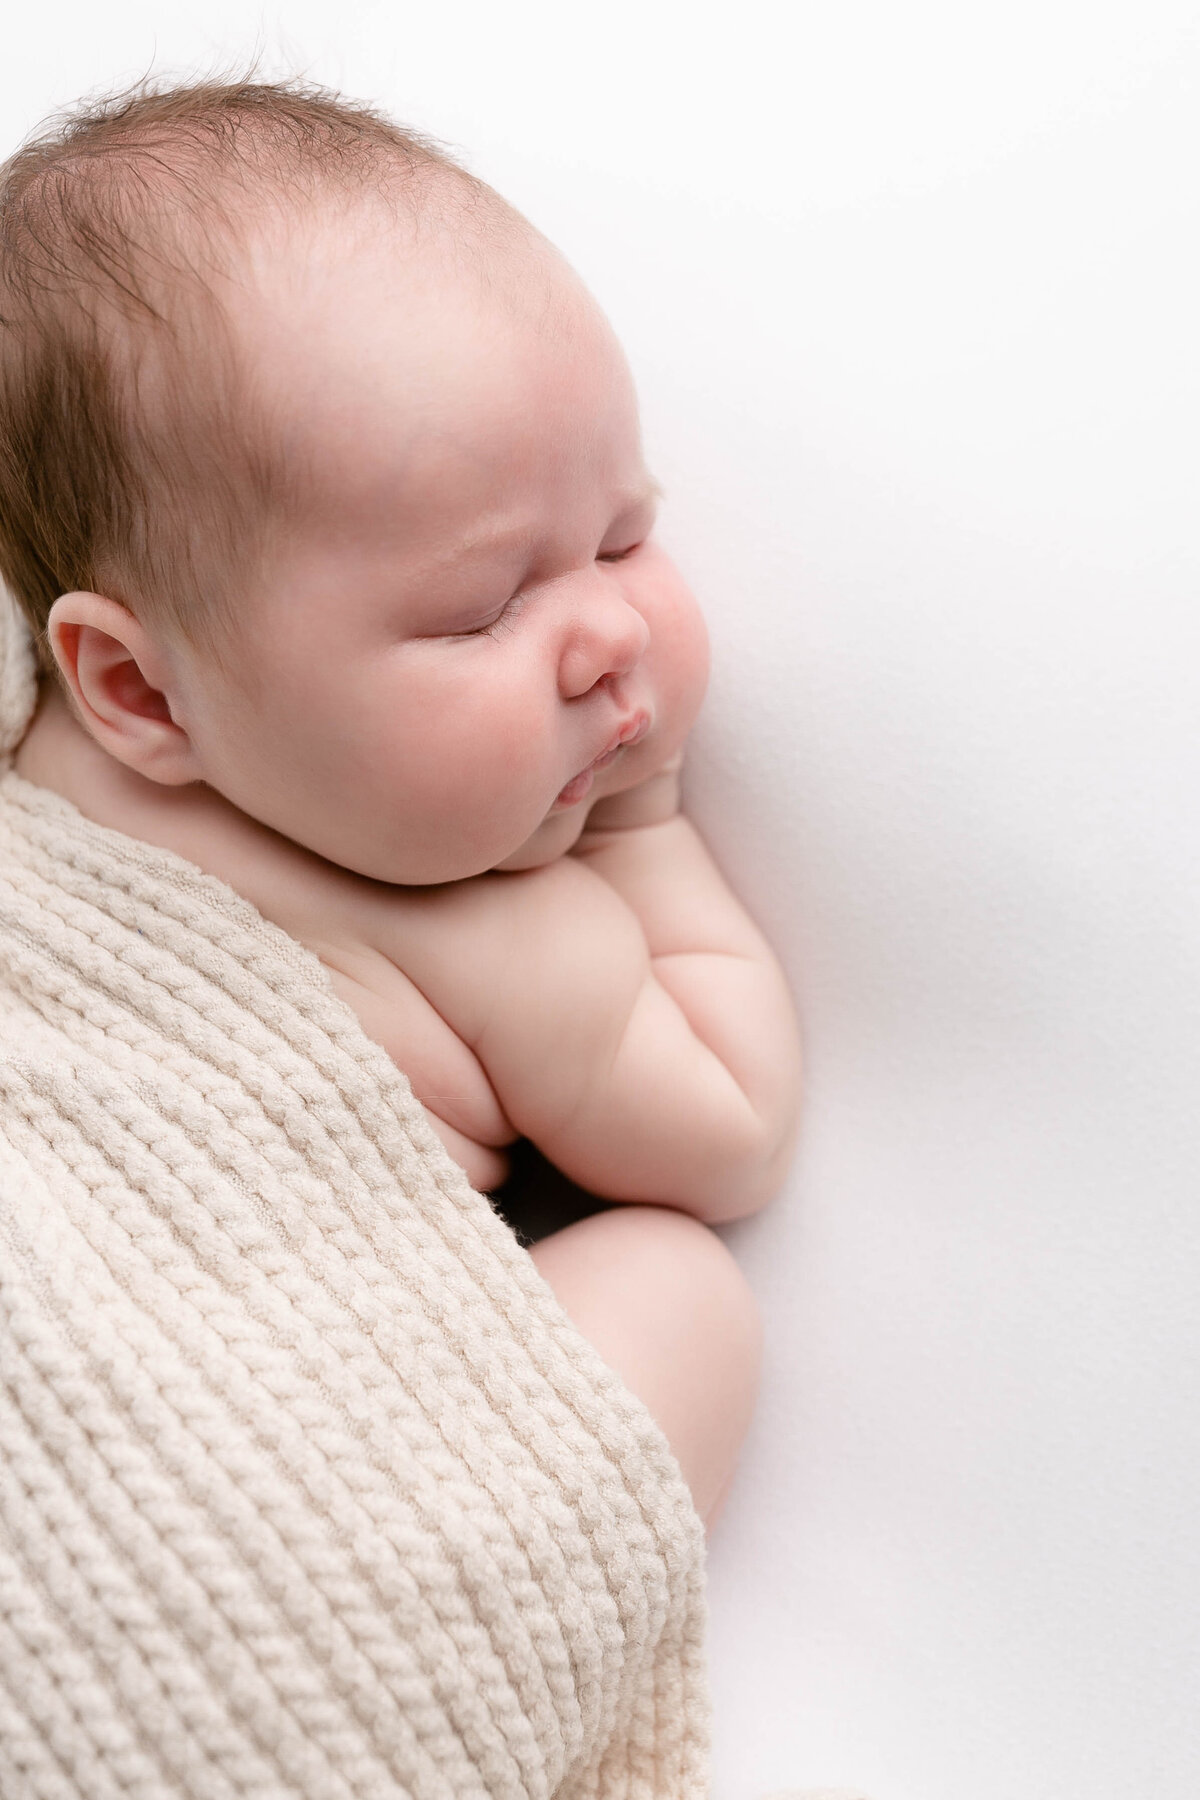 light-skinned baby sleeping on stomach  and half covered with a cream textured blanket. Image taken during portland Oregon newborn photo session.